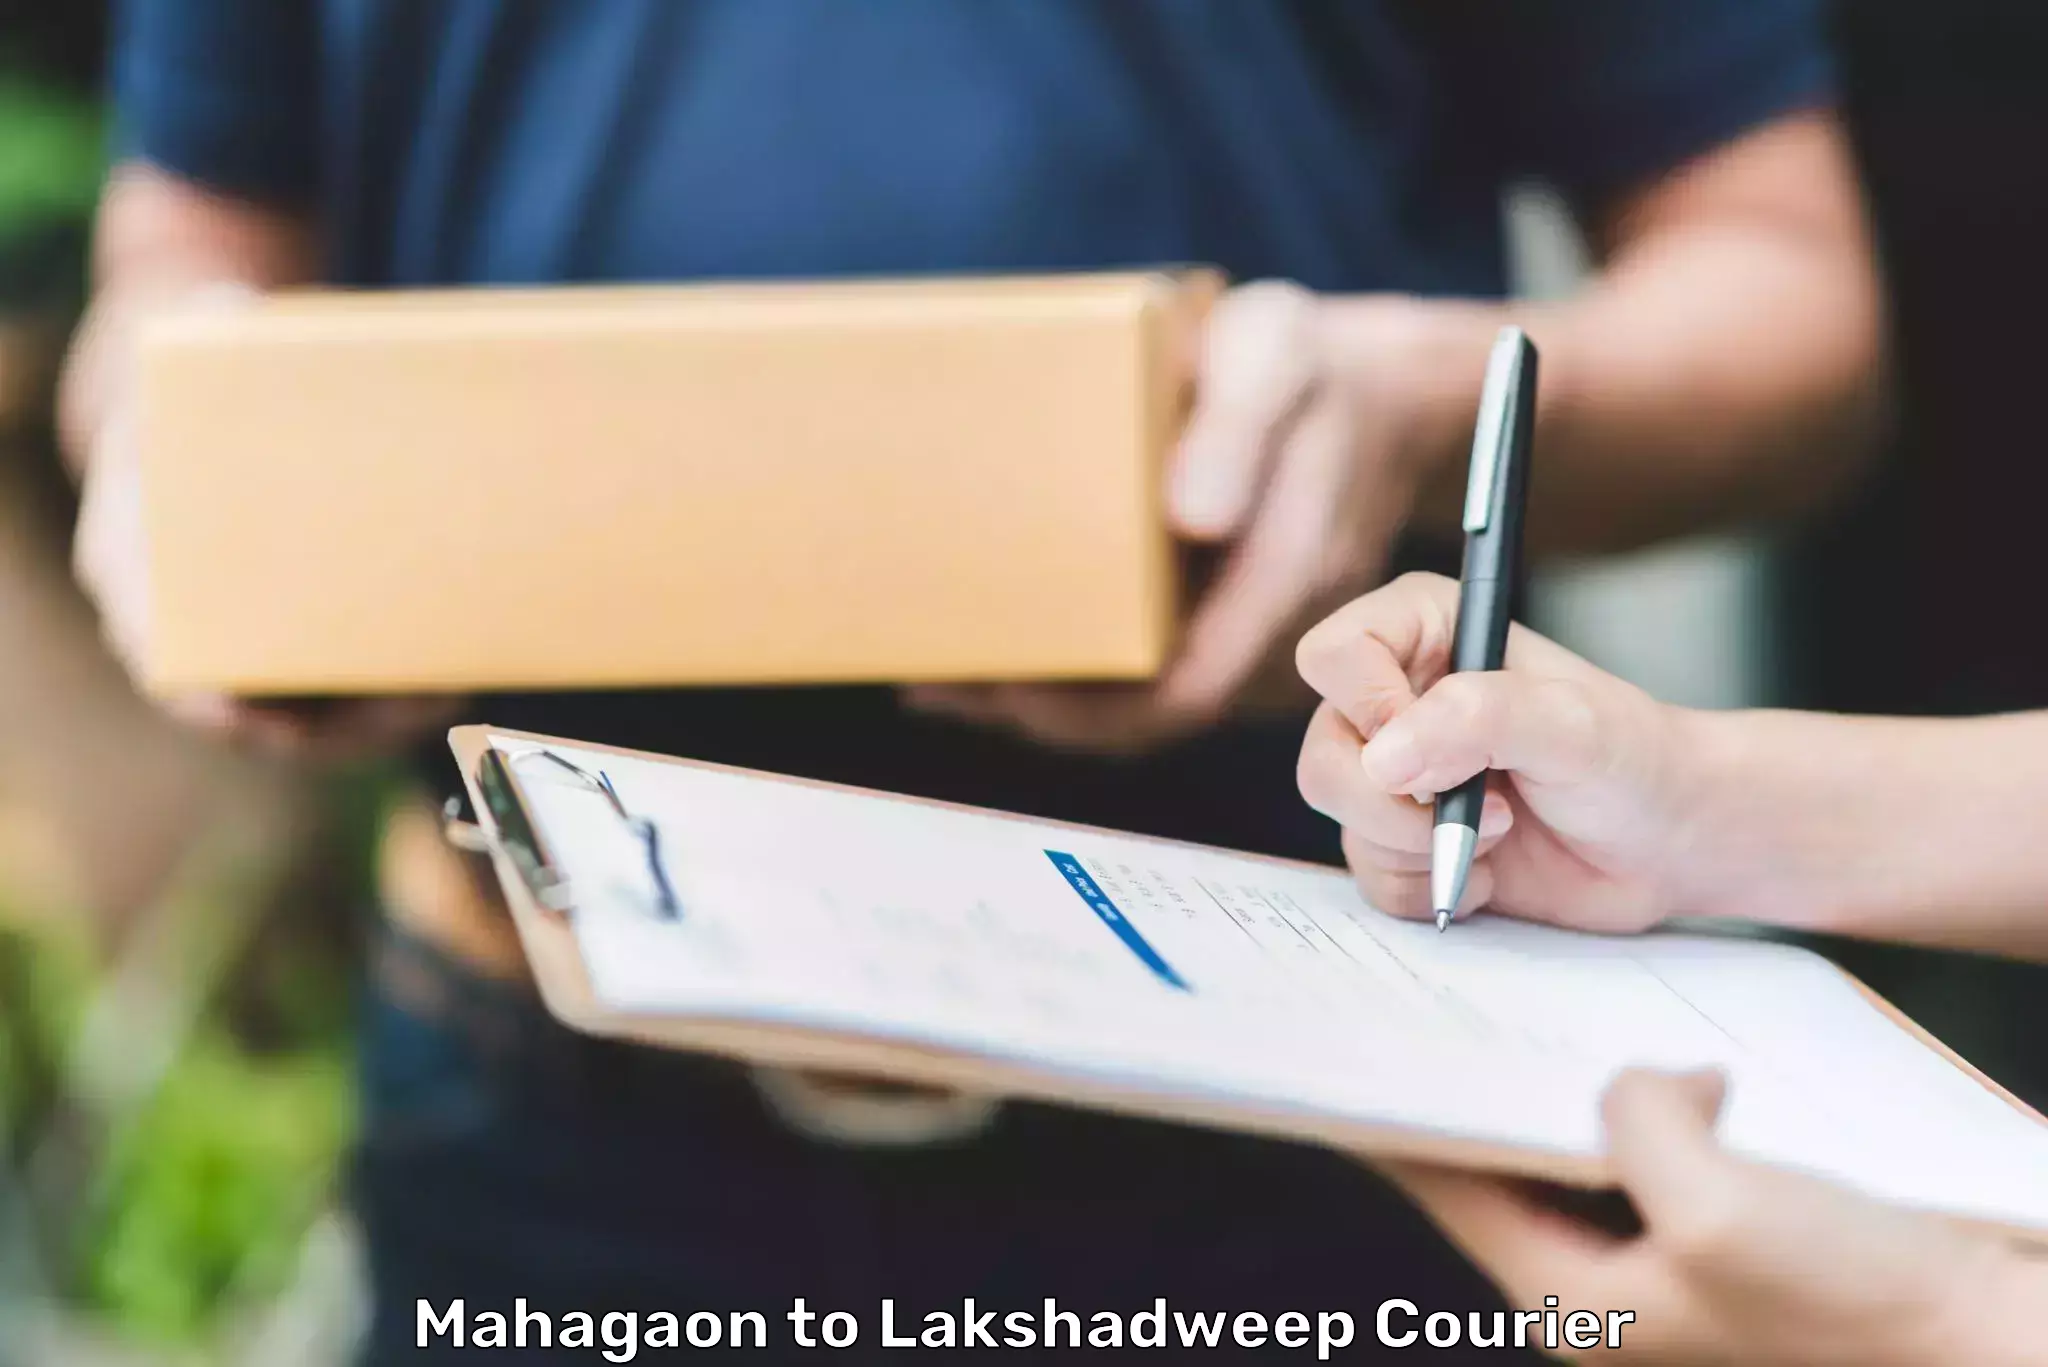 Local delivery service Mahagaon to Lakshadweep